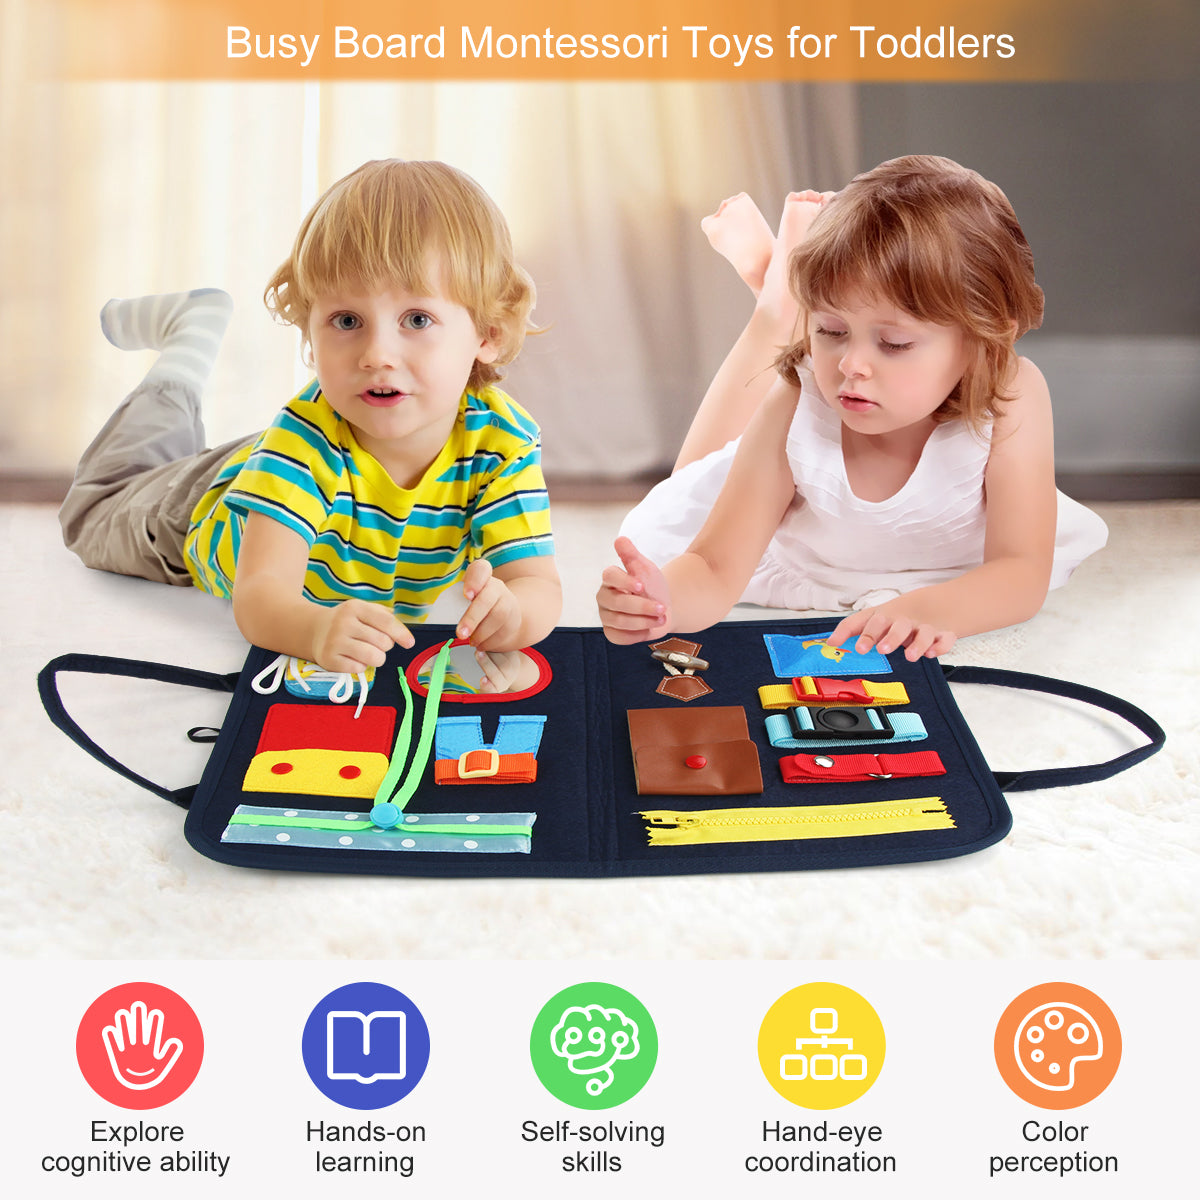 Joyfia Busy Board, Montessori Toys for Toddlers 1-3, Activity Sensory Board for Fine Motor Skills Learning, Preschool Educational Toys Travel Activities for Plane, Gifts for 2-4 Year Old Boys Girls